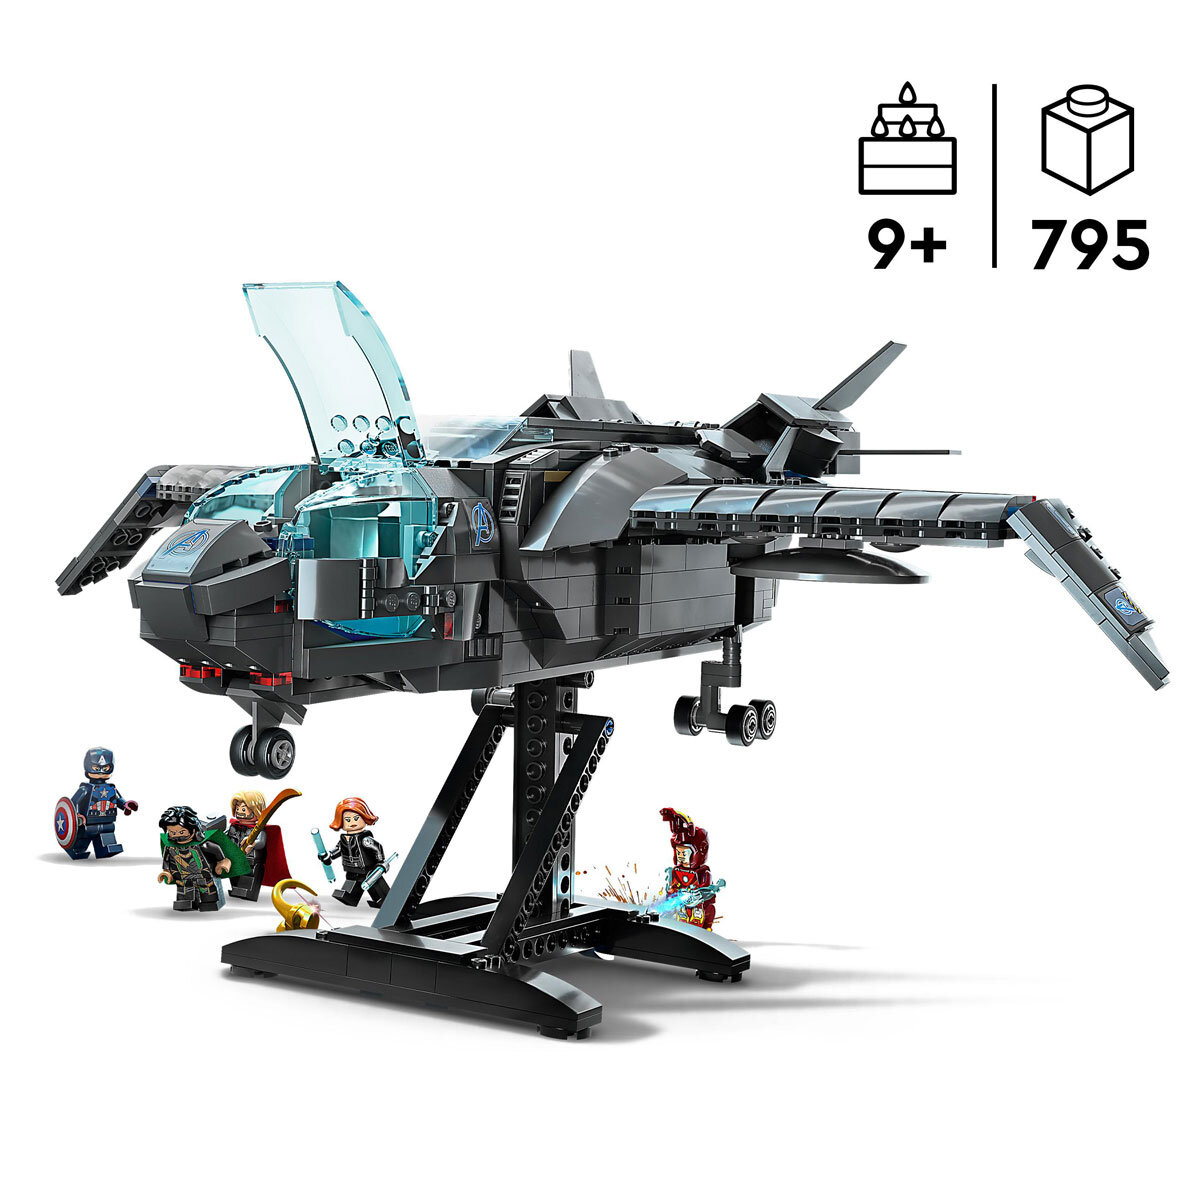 Buy LEGO The Avengers Quinjet Overview Image at Costco.co.uk